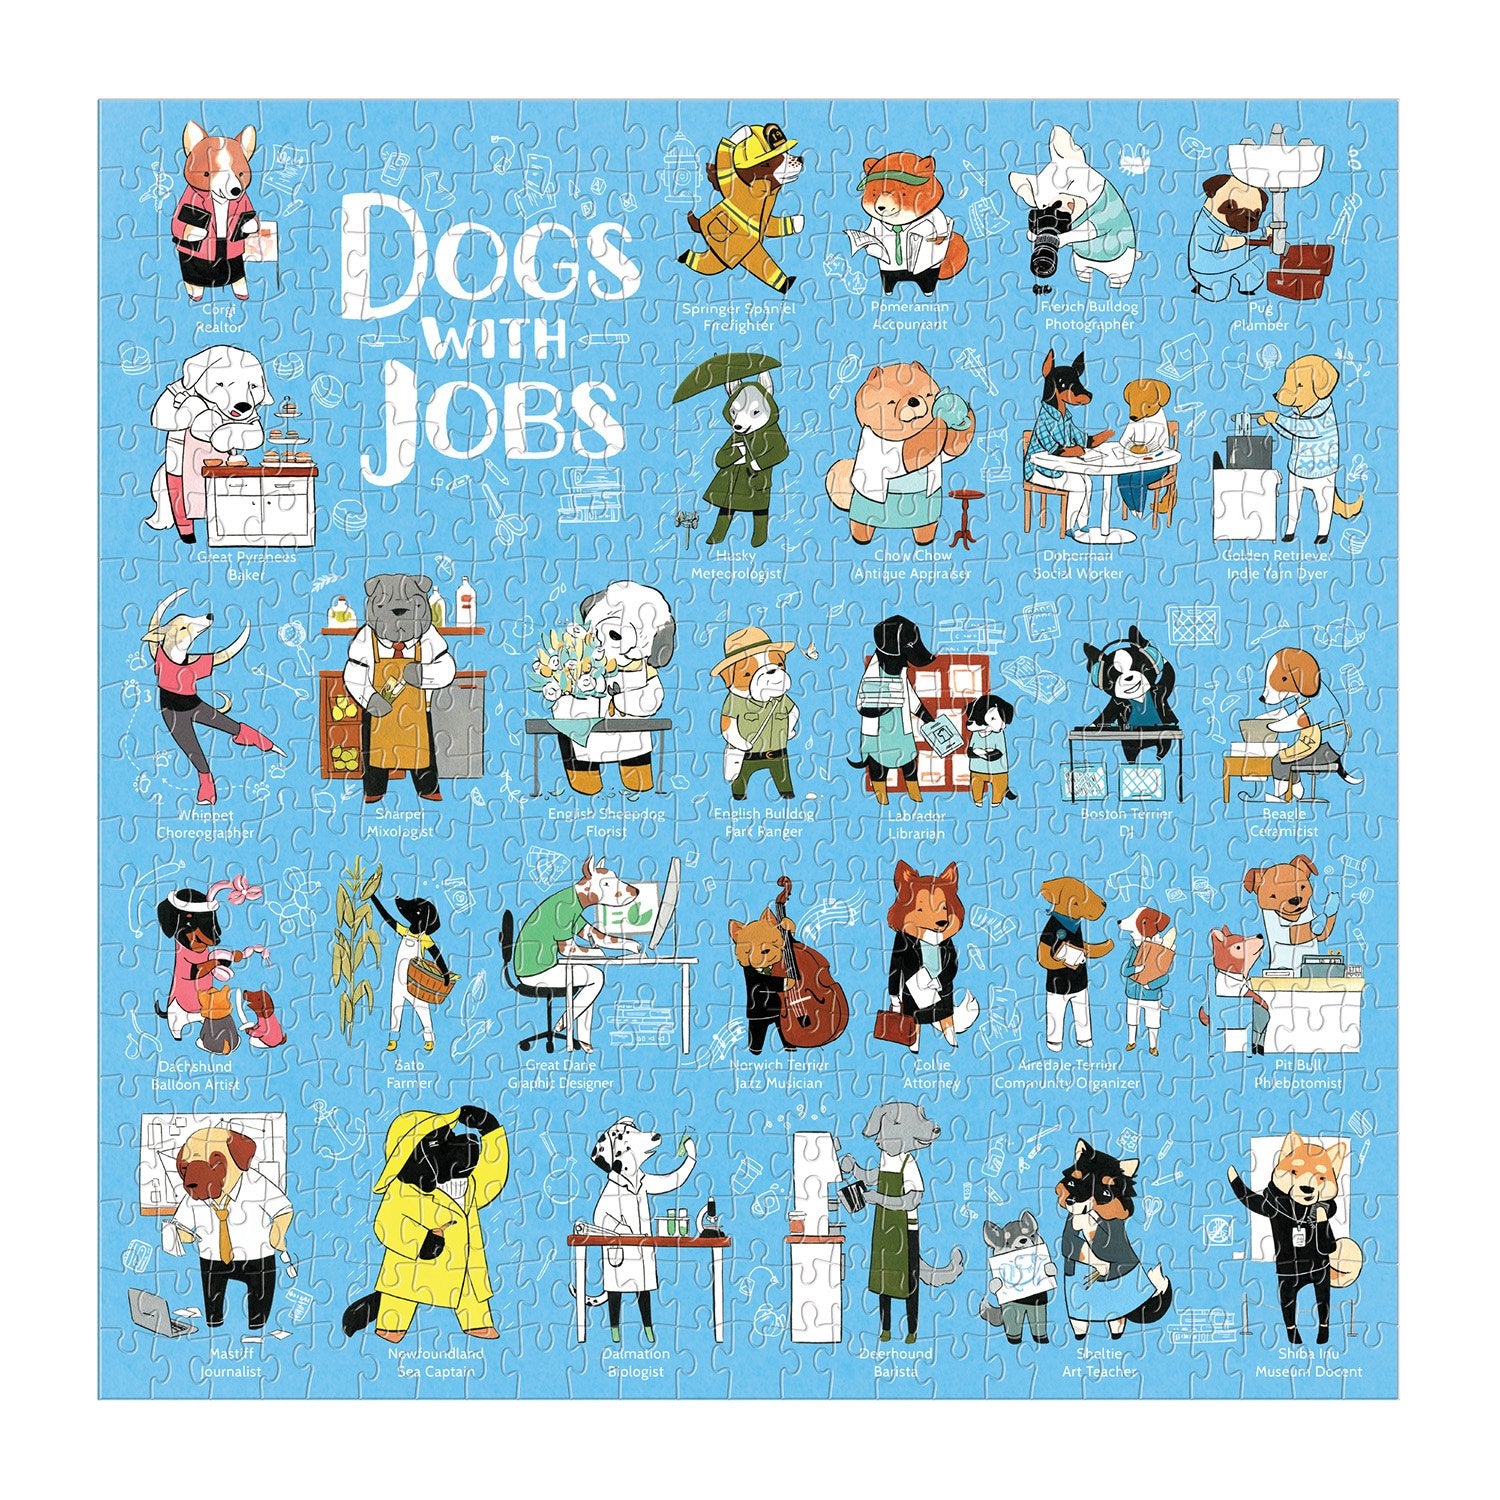 Boss Dogs 500 Piece Family Puzzle